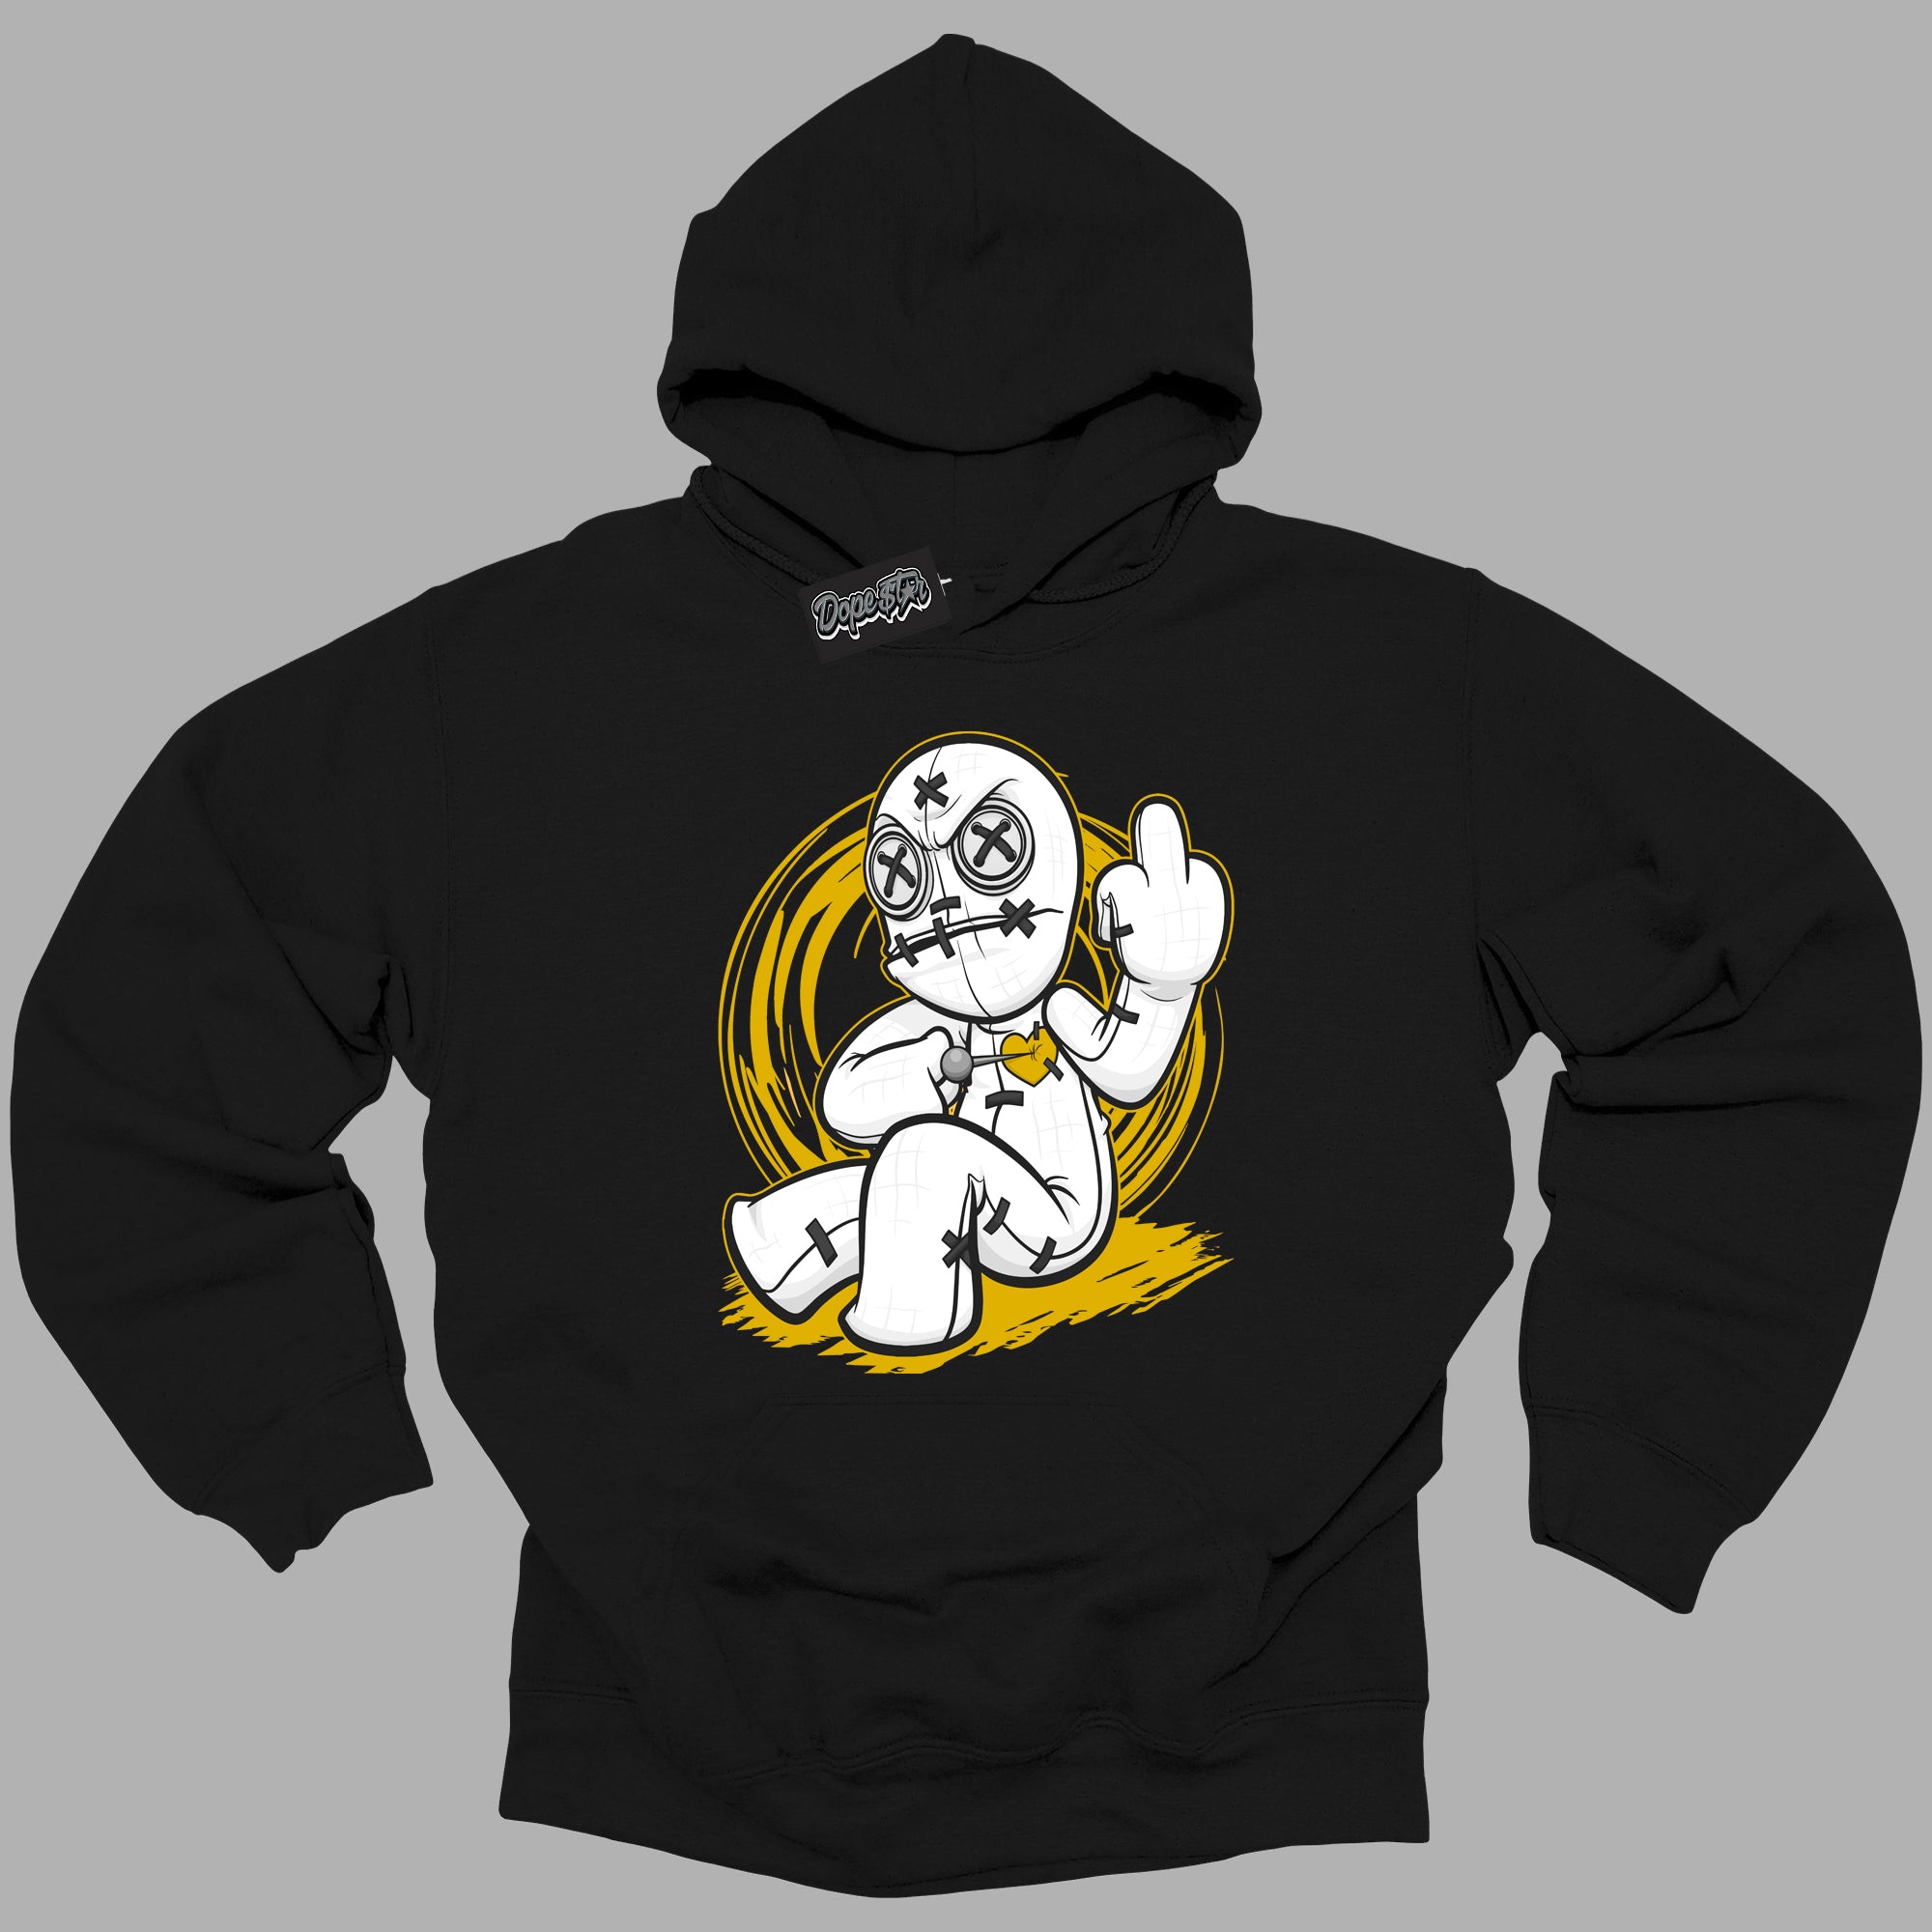 Cool Black Hoodie with “ VooDoo Doll ”  design that Perfectly Matches Yellow Ochre 6s Sneakers.